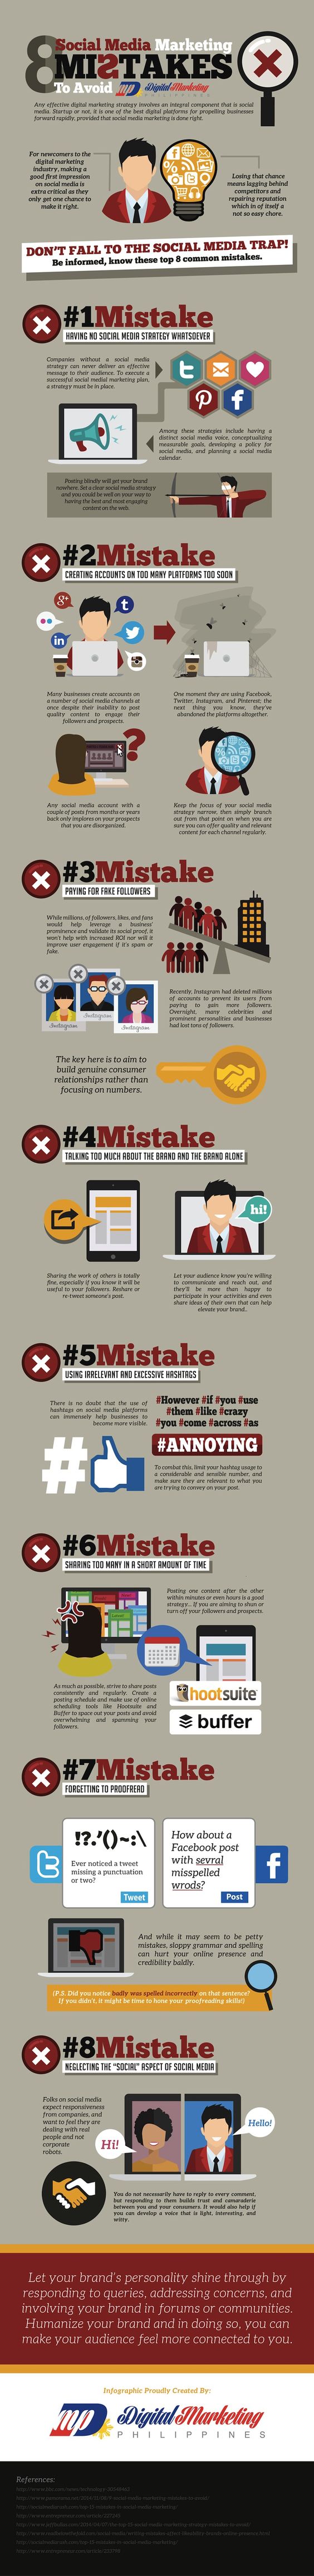 Lots of great tips here! --- Social Media Marketing Mistakes